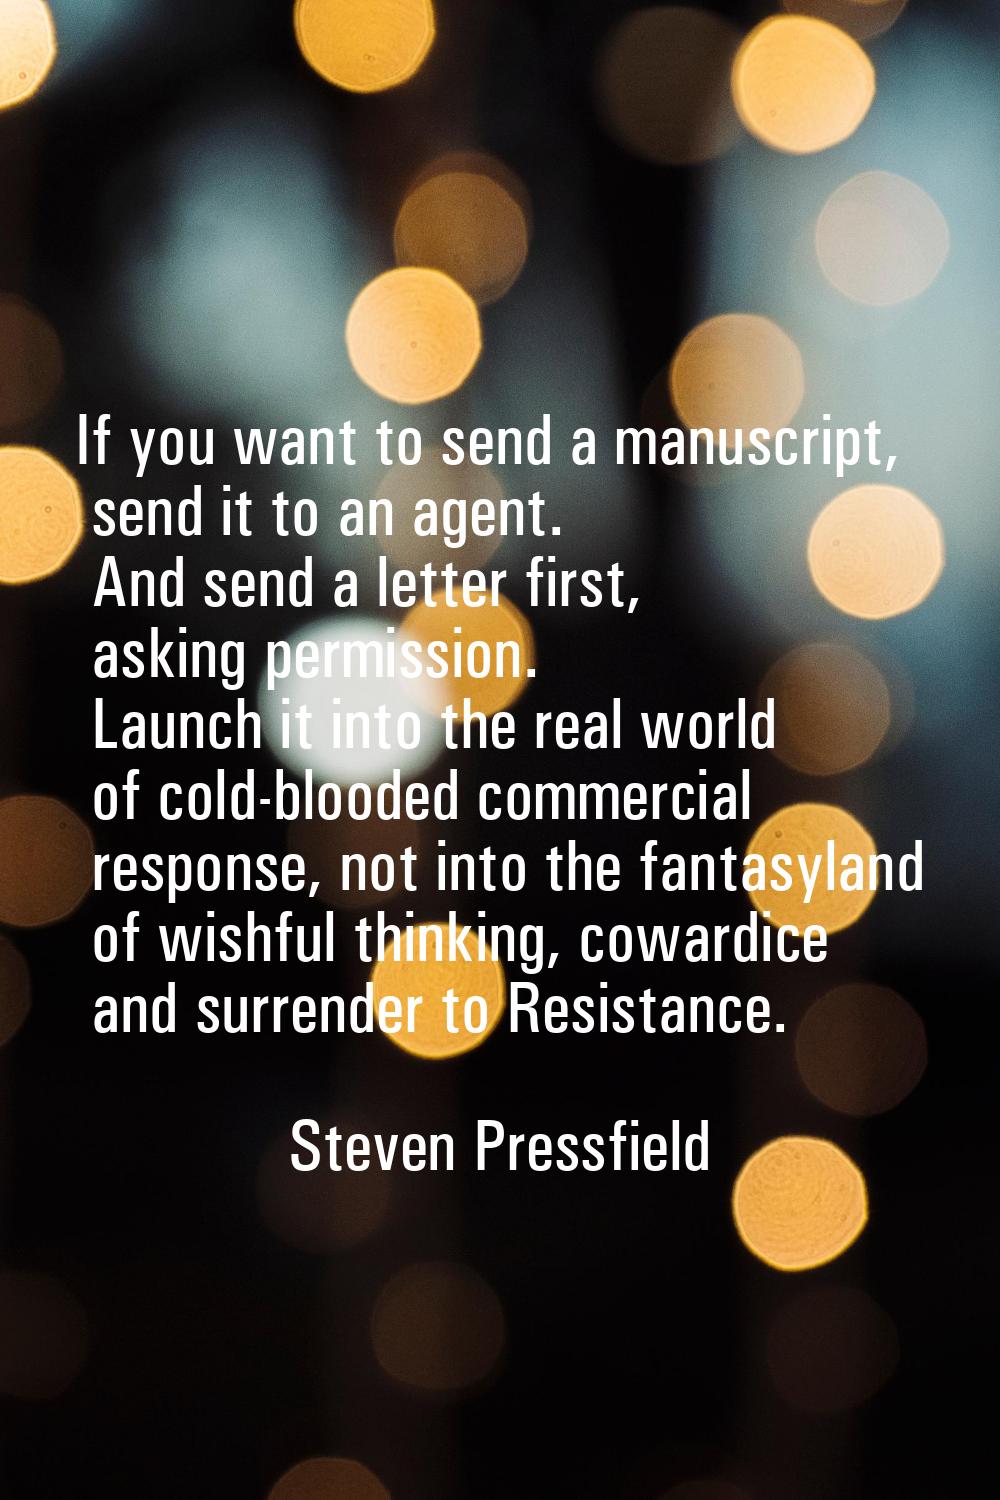 If you want to send a manuscript, send it to an agent. And send a letter first, asking permission. 